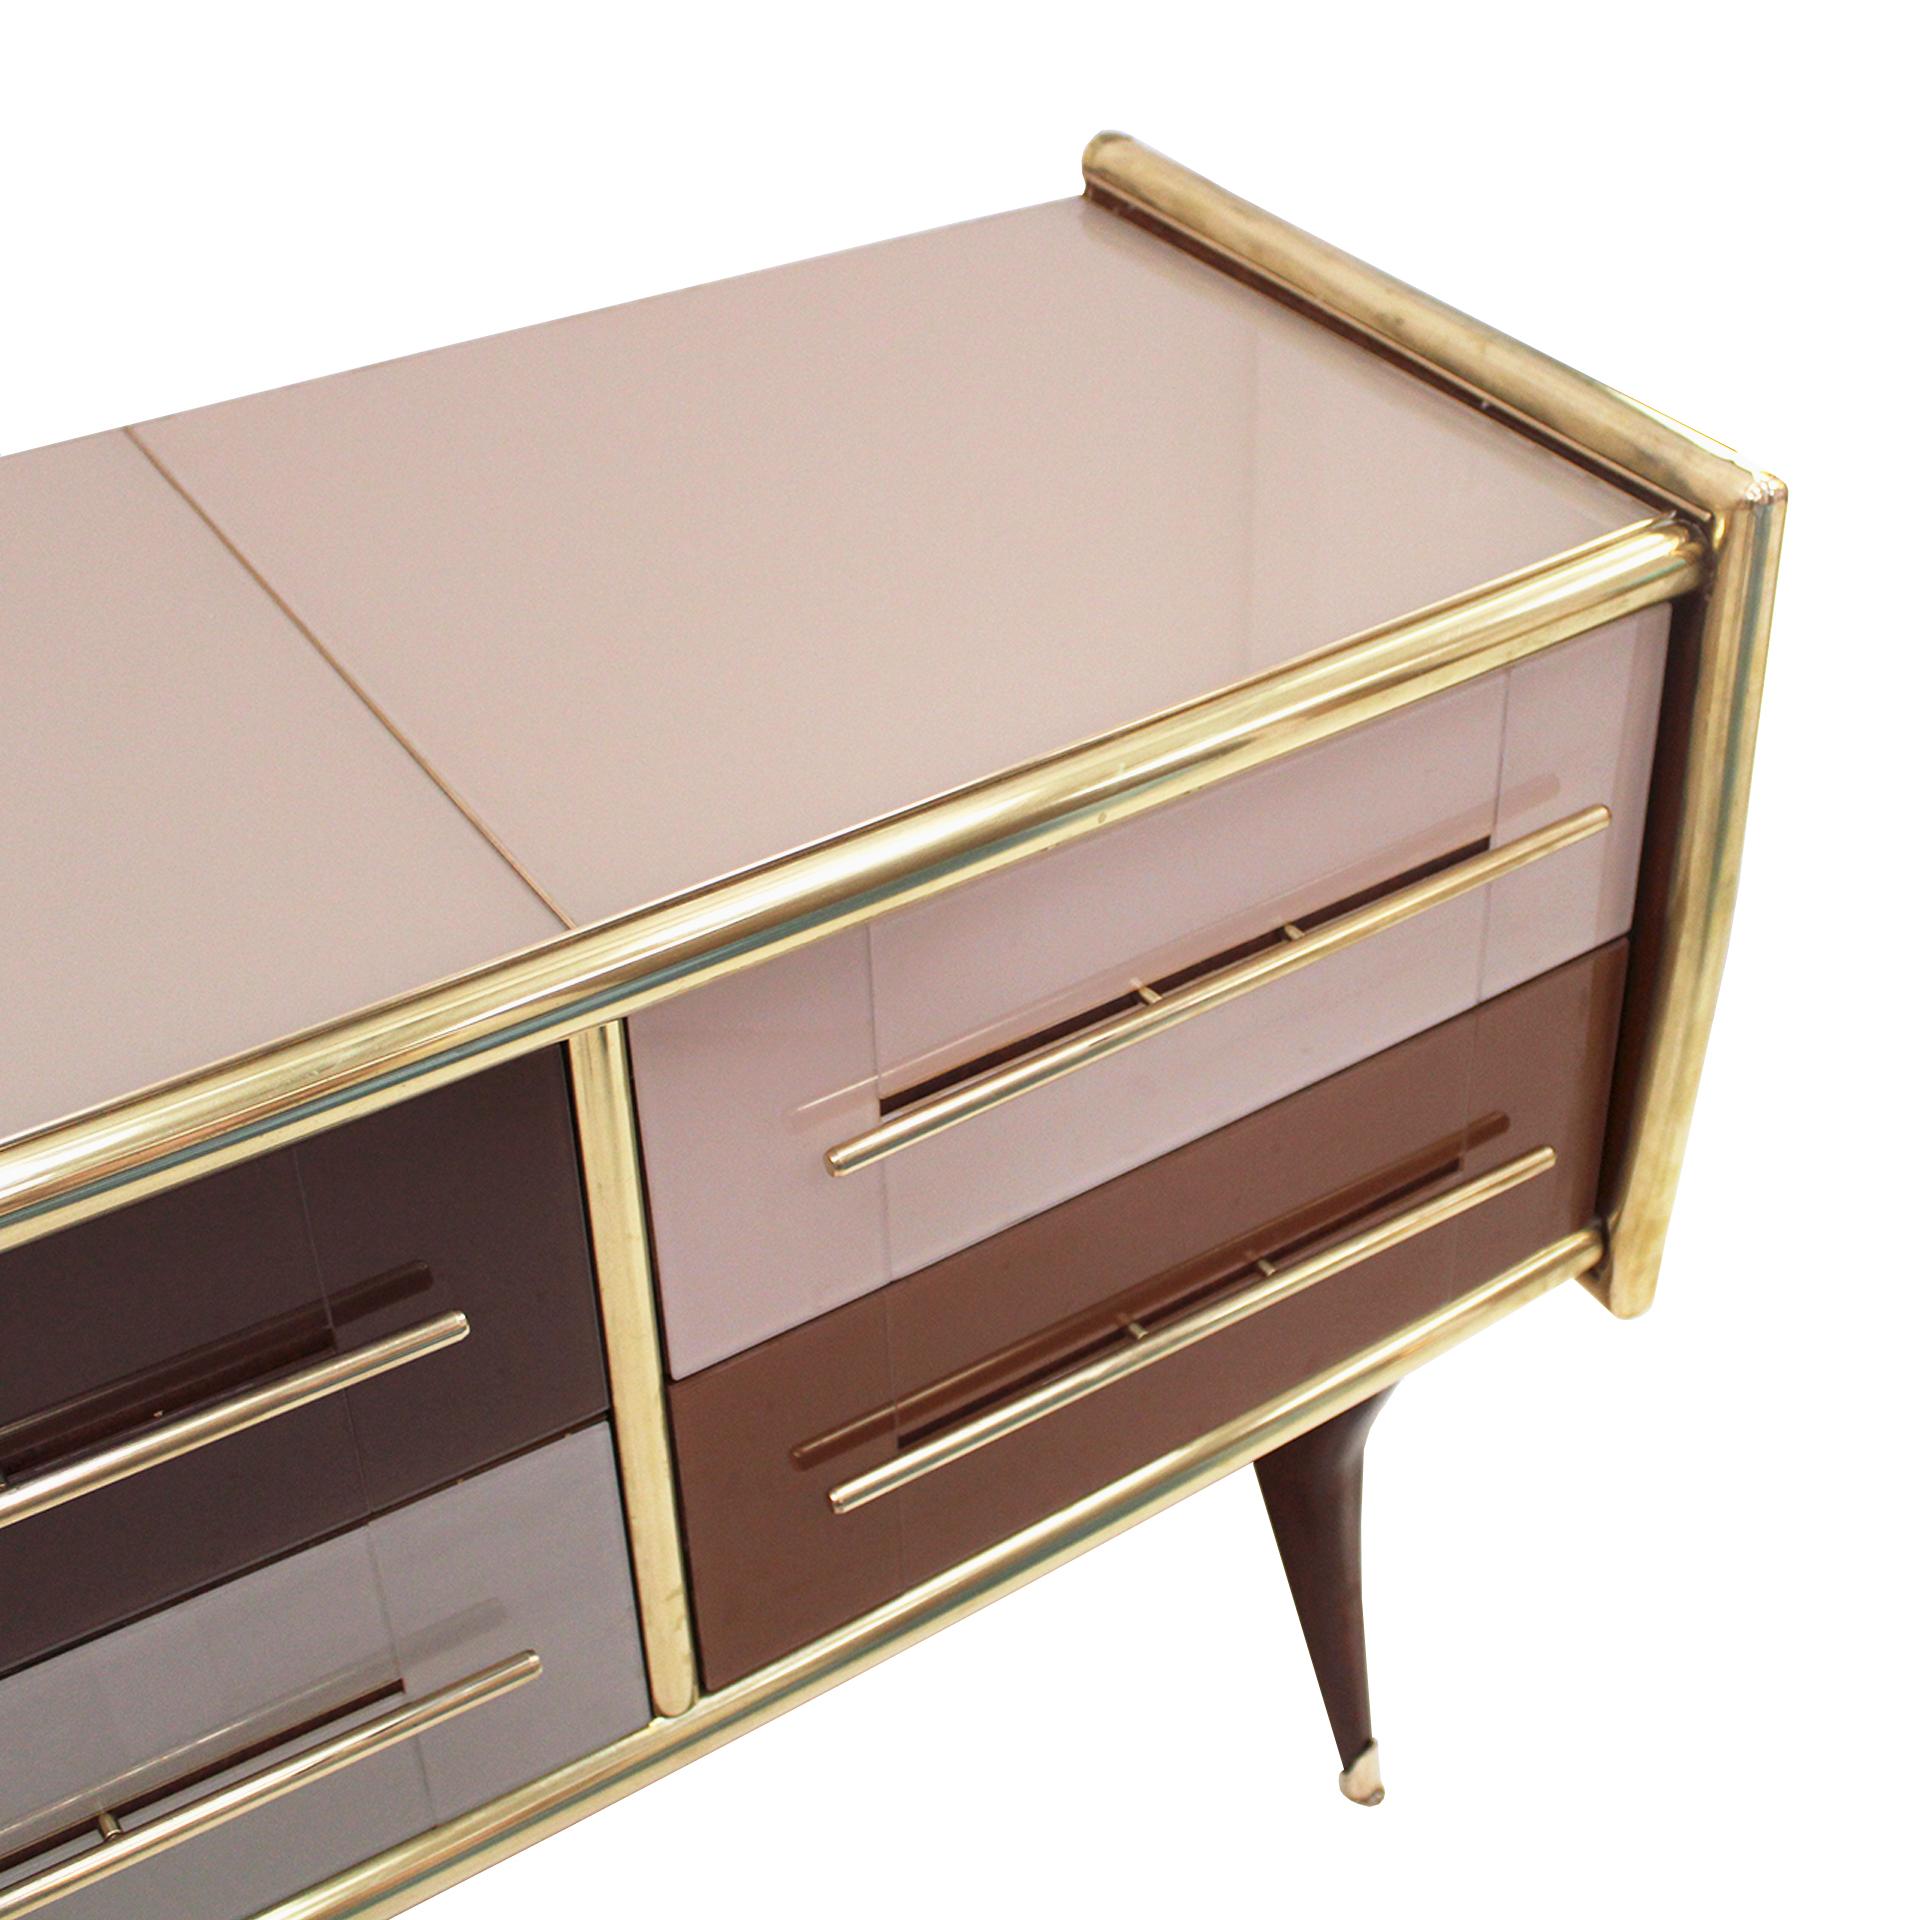 Sideborad comoposed of 6 drawers with original 1950s solid wood sturcture covered in colored glass. Handles, profiles and legs made of brass. Italy.

Our main target is customer satisfaction, so we include in the price for this item professional and